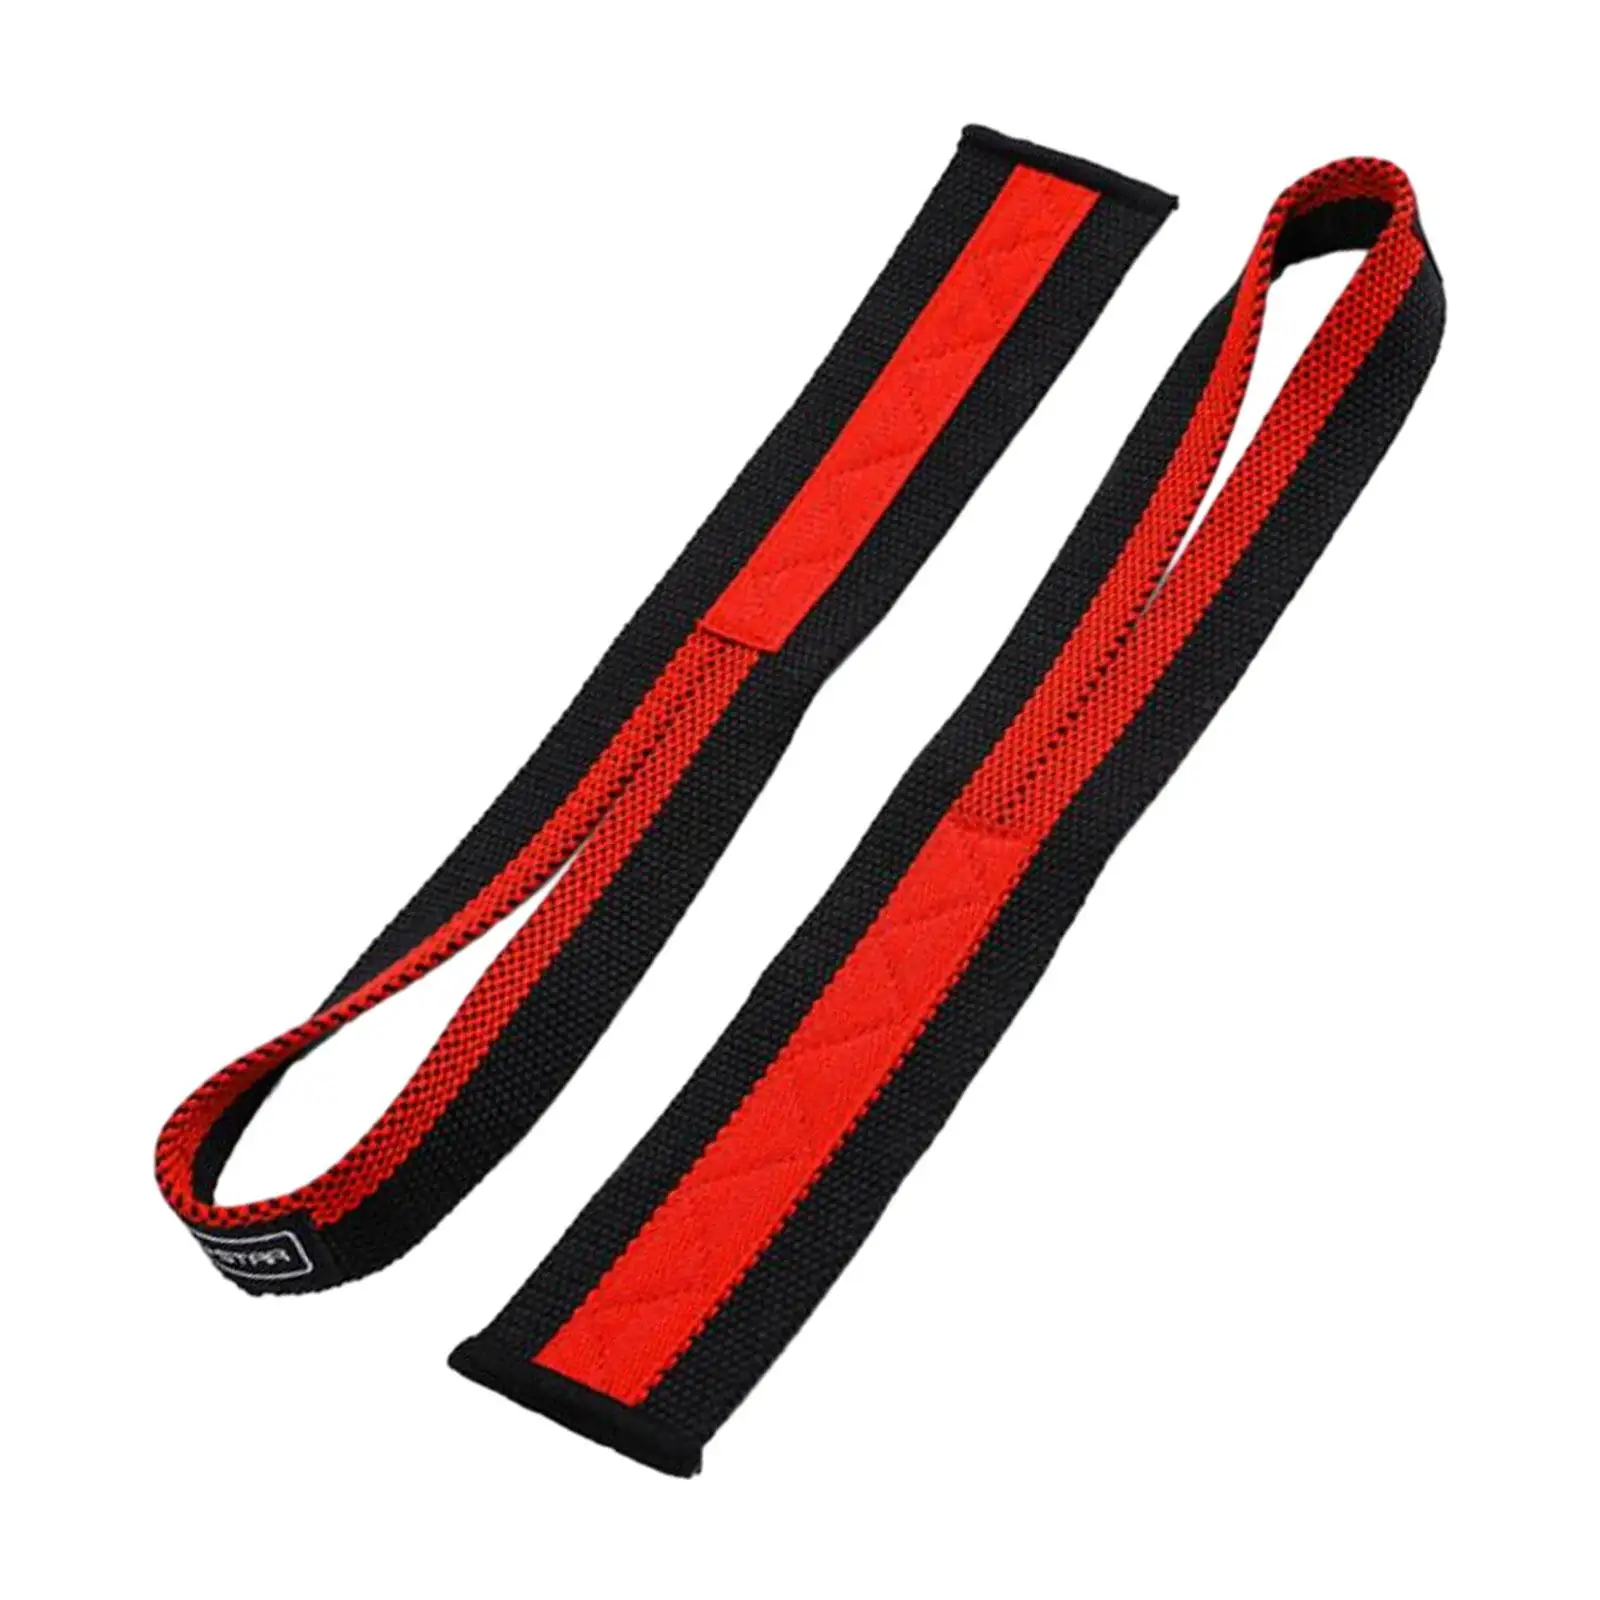 2x Weight Lifting Straps Weightlifting Wrist Straps for Women Hand Grip Deadlift Straps for Strength Training Dumbbell